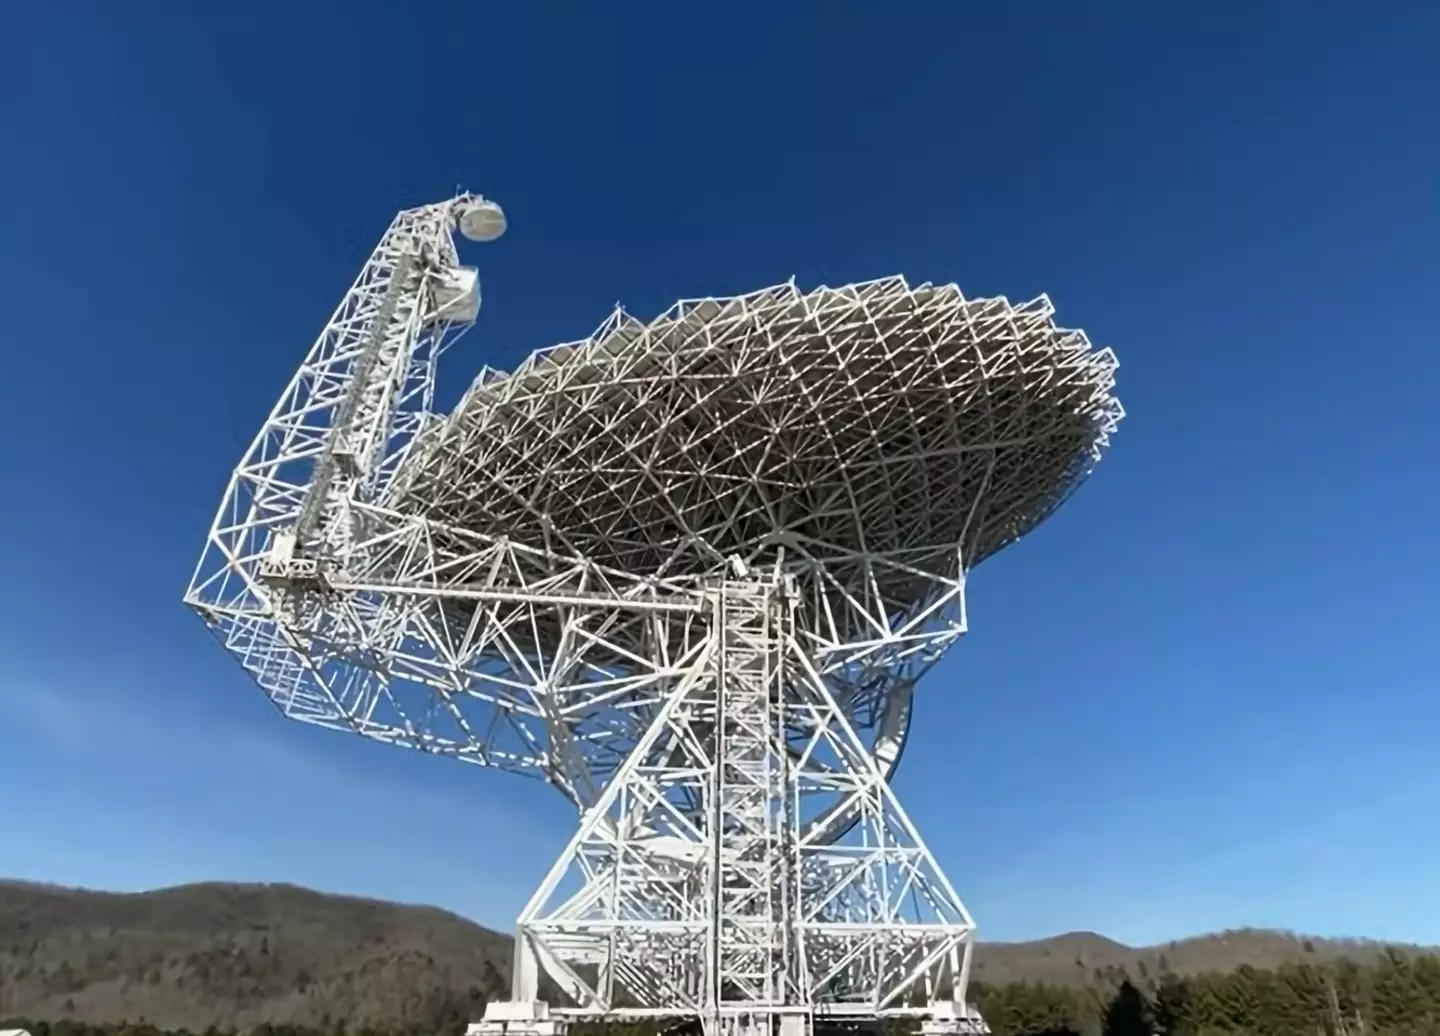 It takes a lot of technology to receive an alien message.